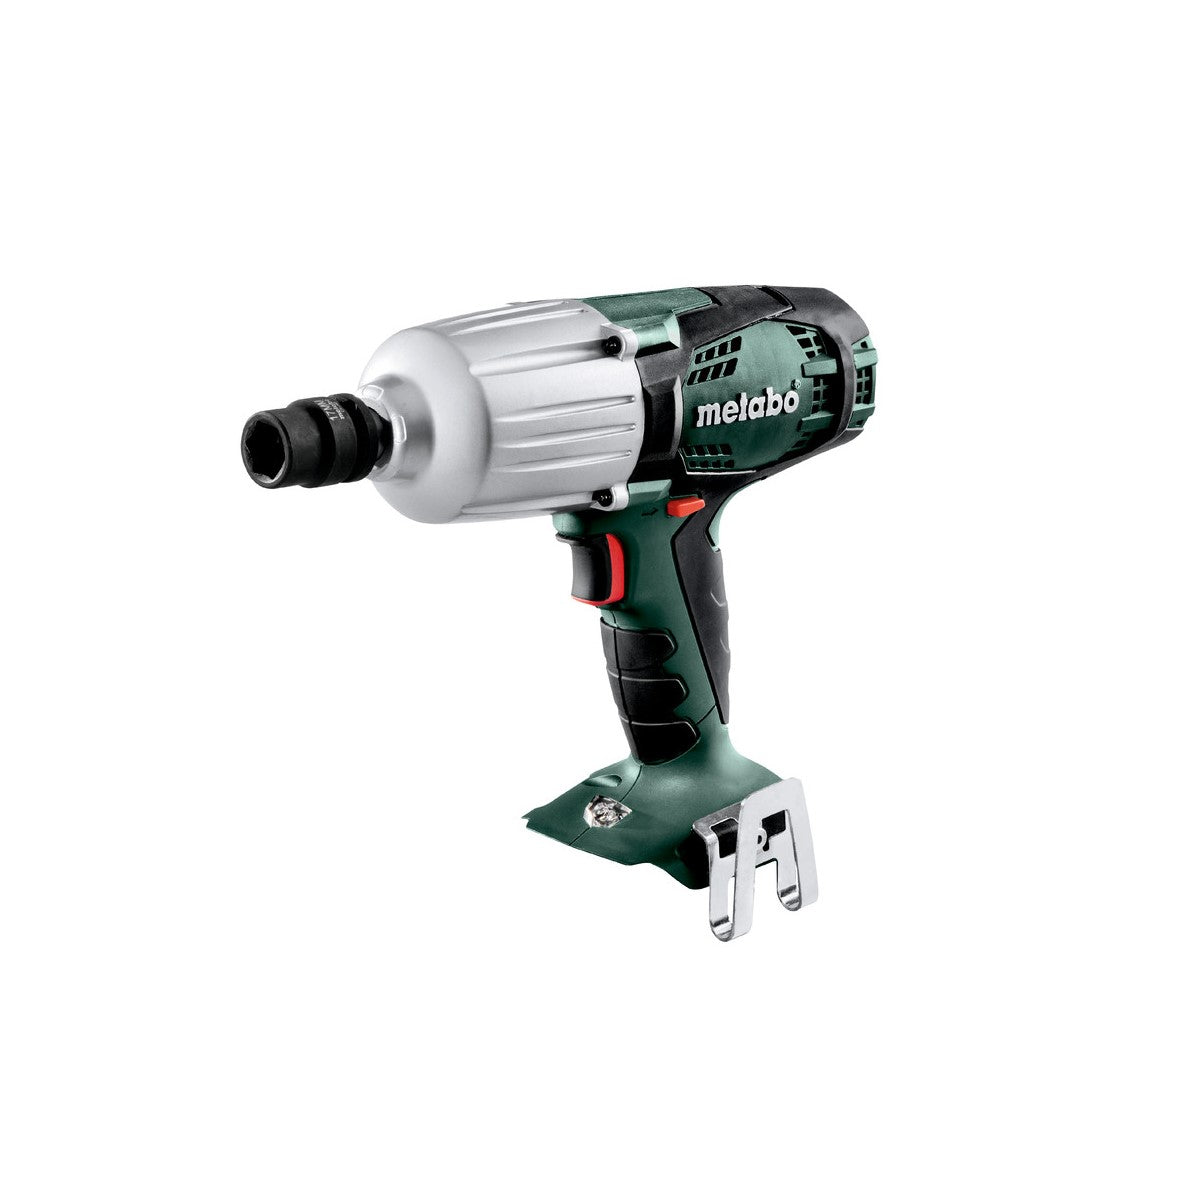 Metabo (602198890) SSW LTX 600 Cordless Impact Wrench - Bare Tool